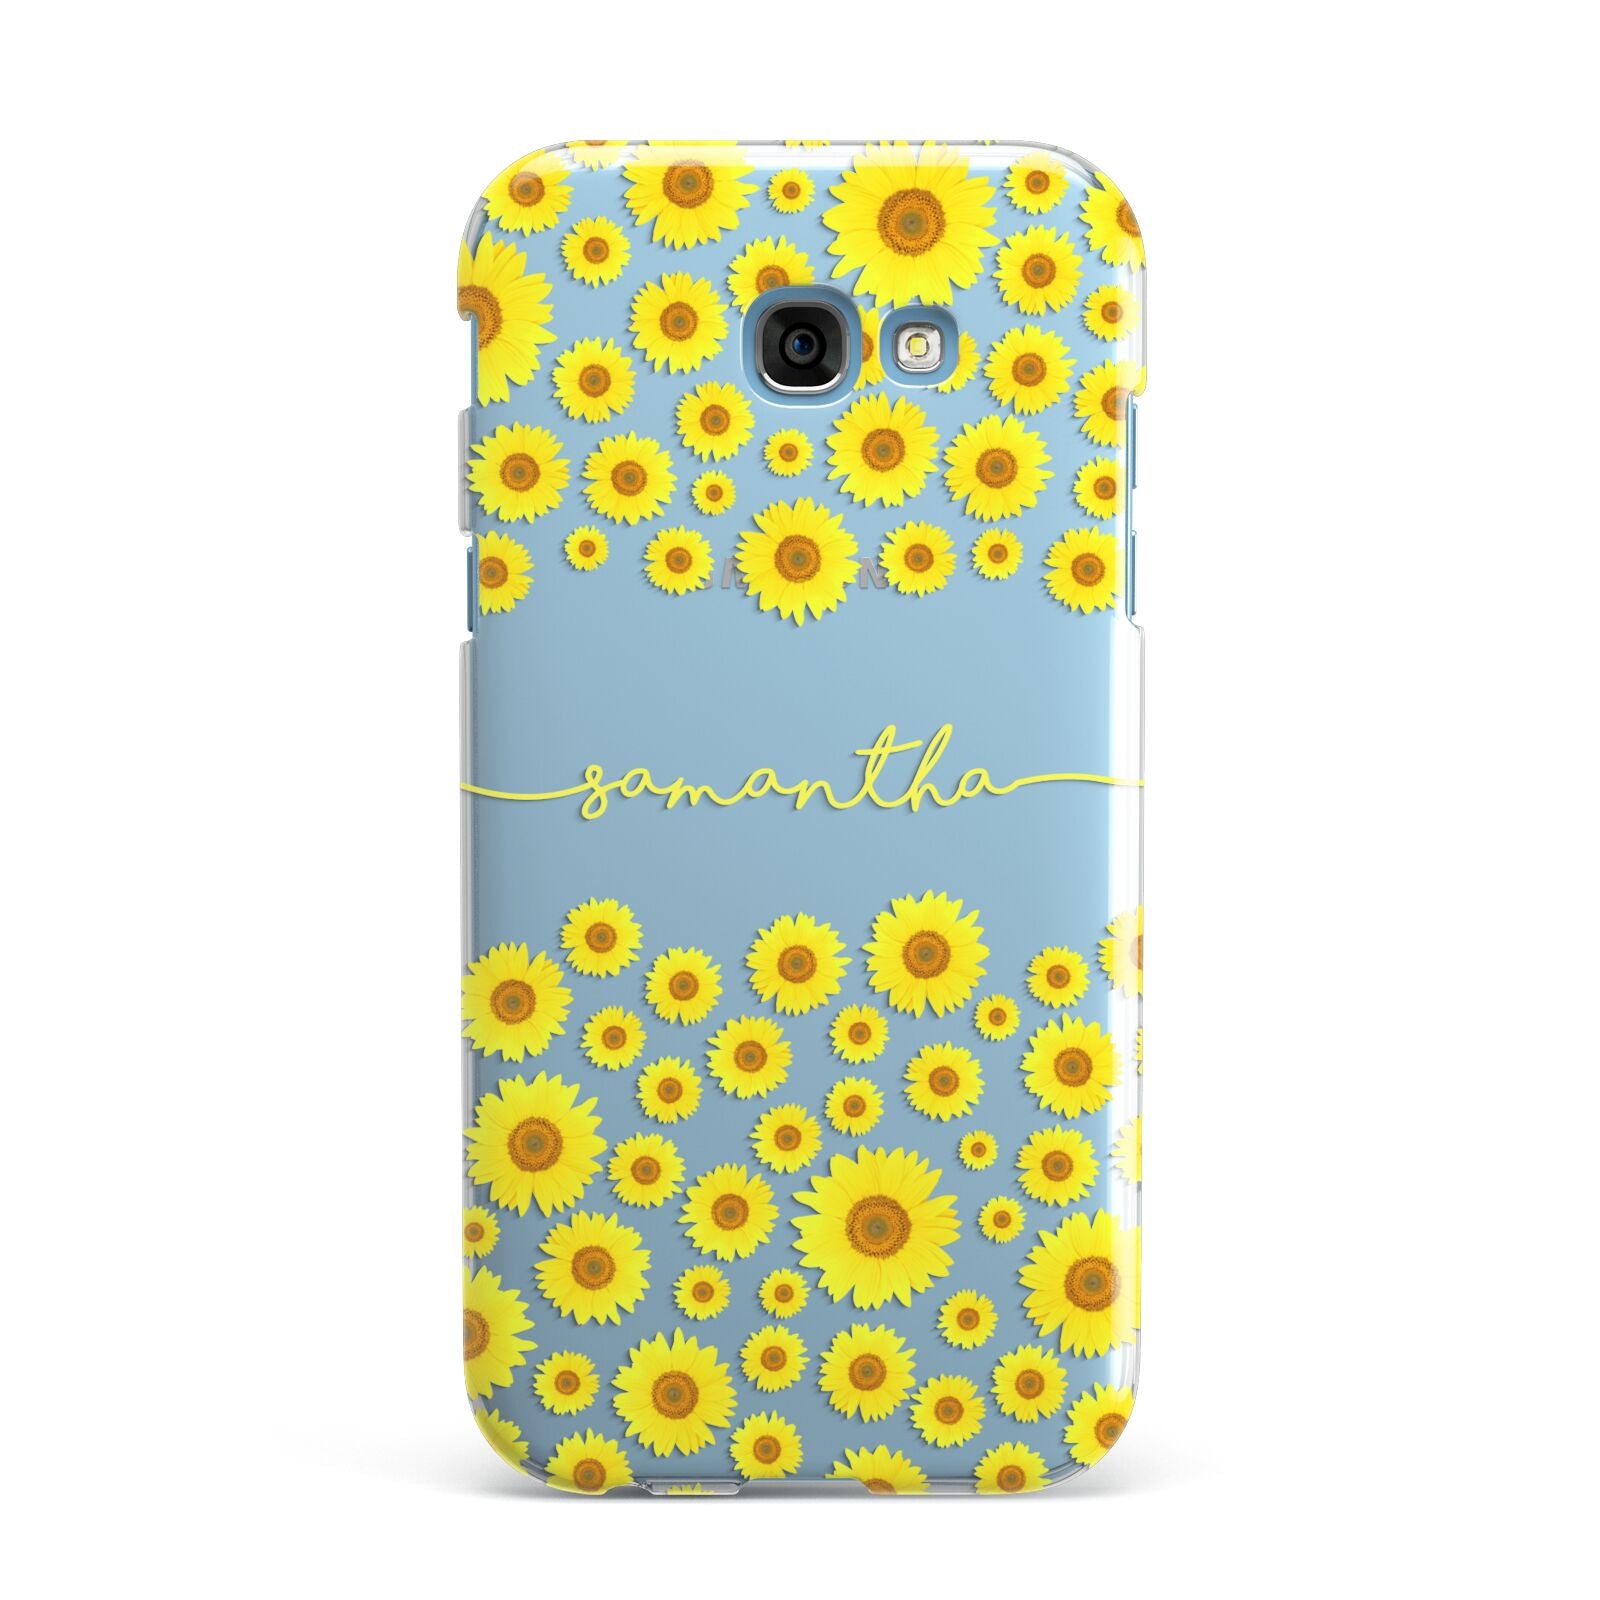 Personalised Sunflower Samsung Galaxy A7 2017 Case